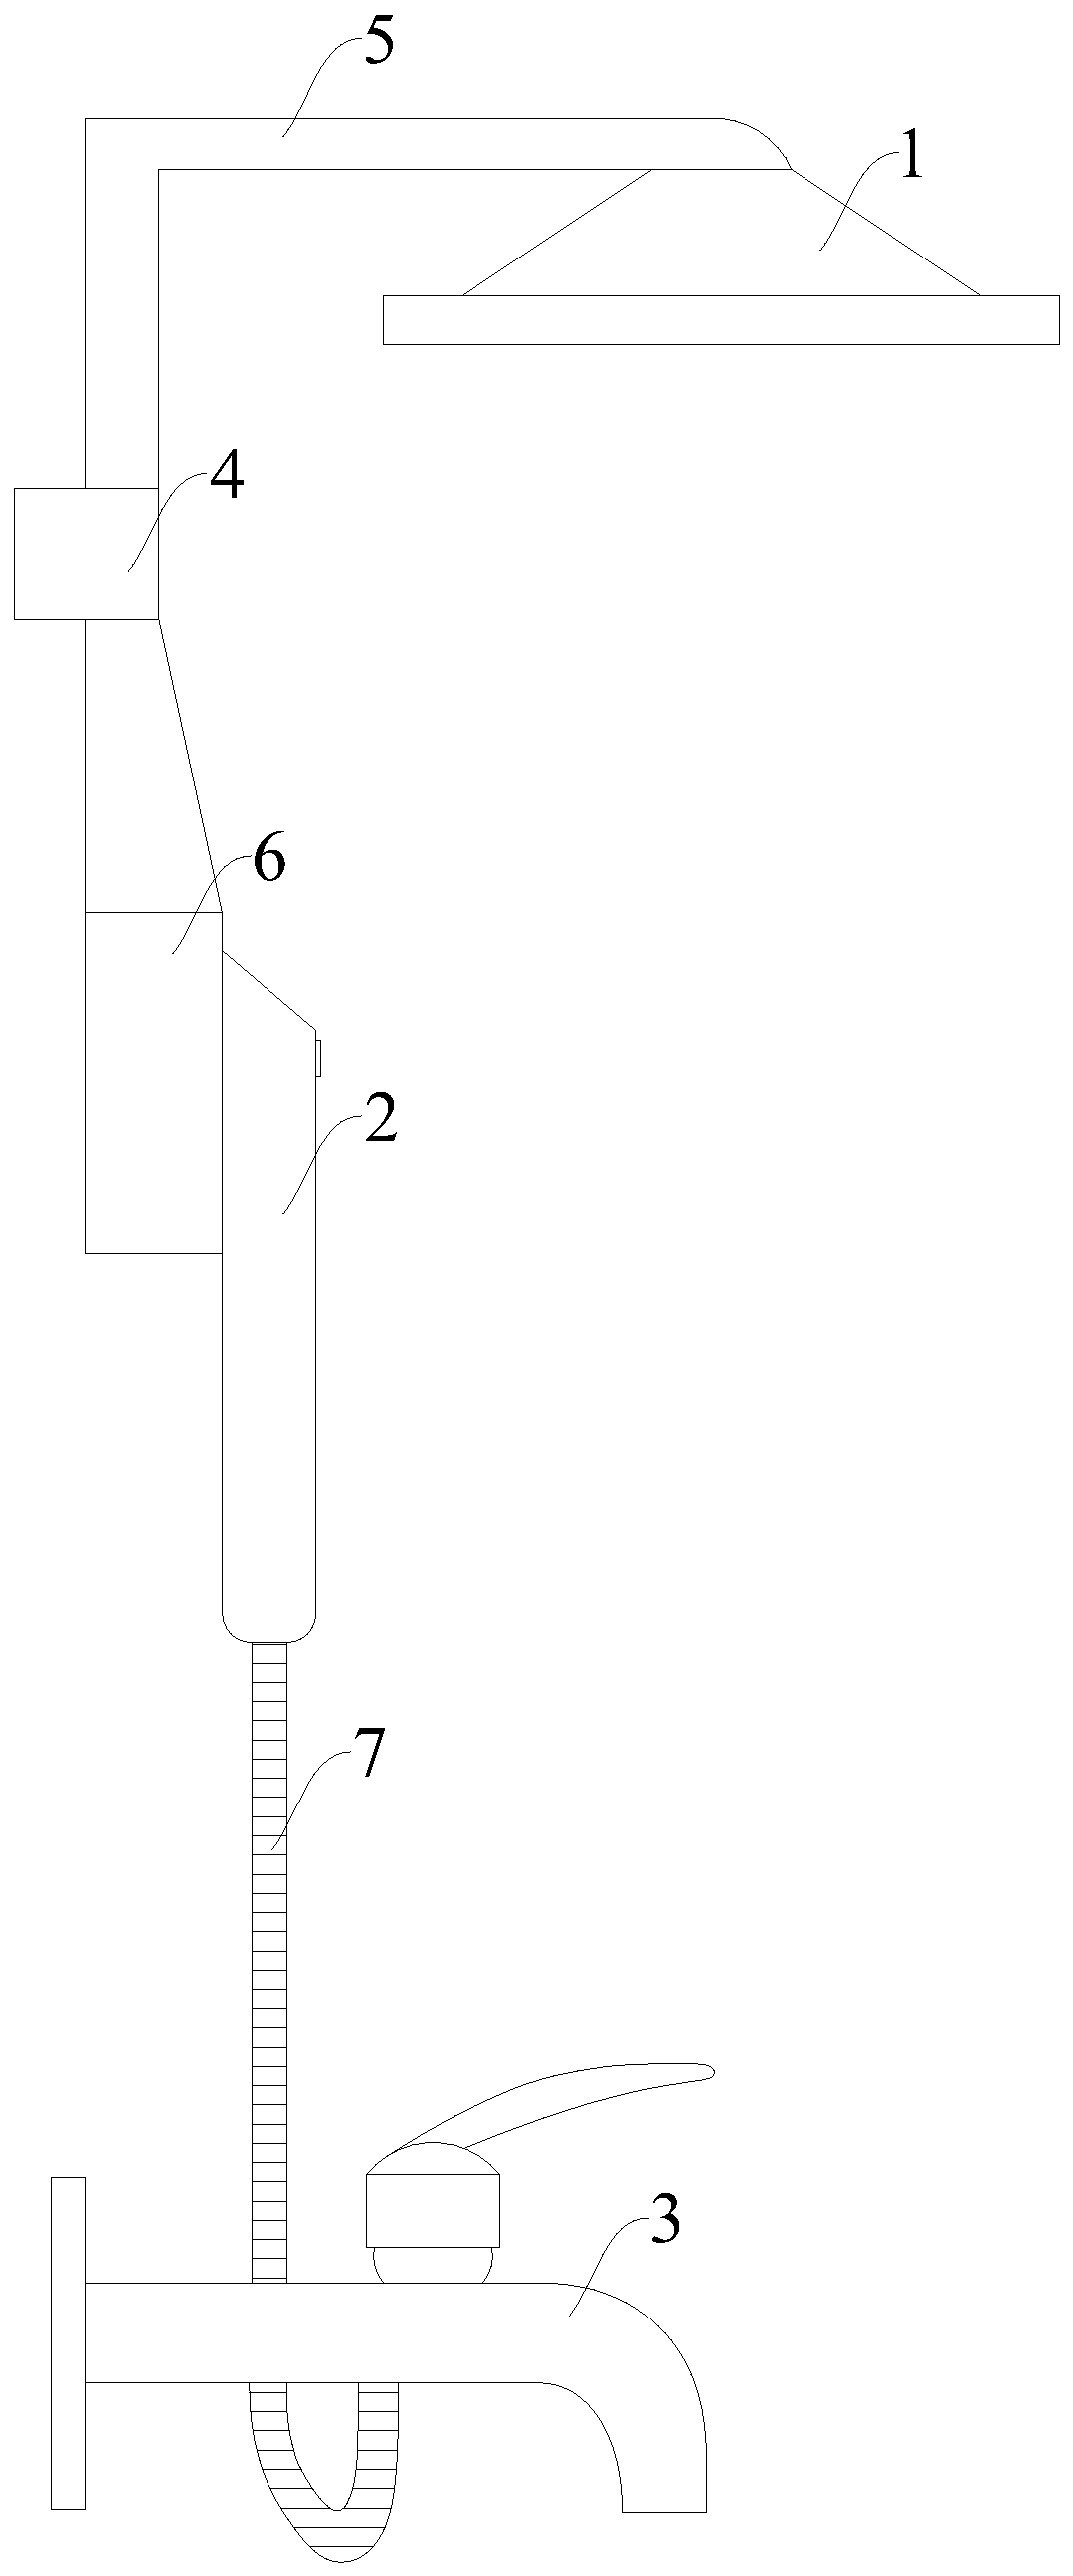 A combined easy-to-load and disassemble shower head